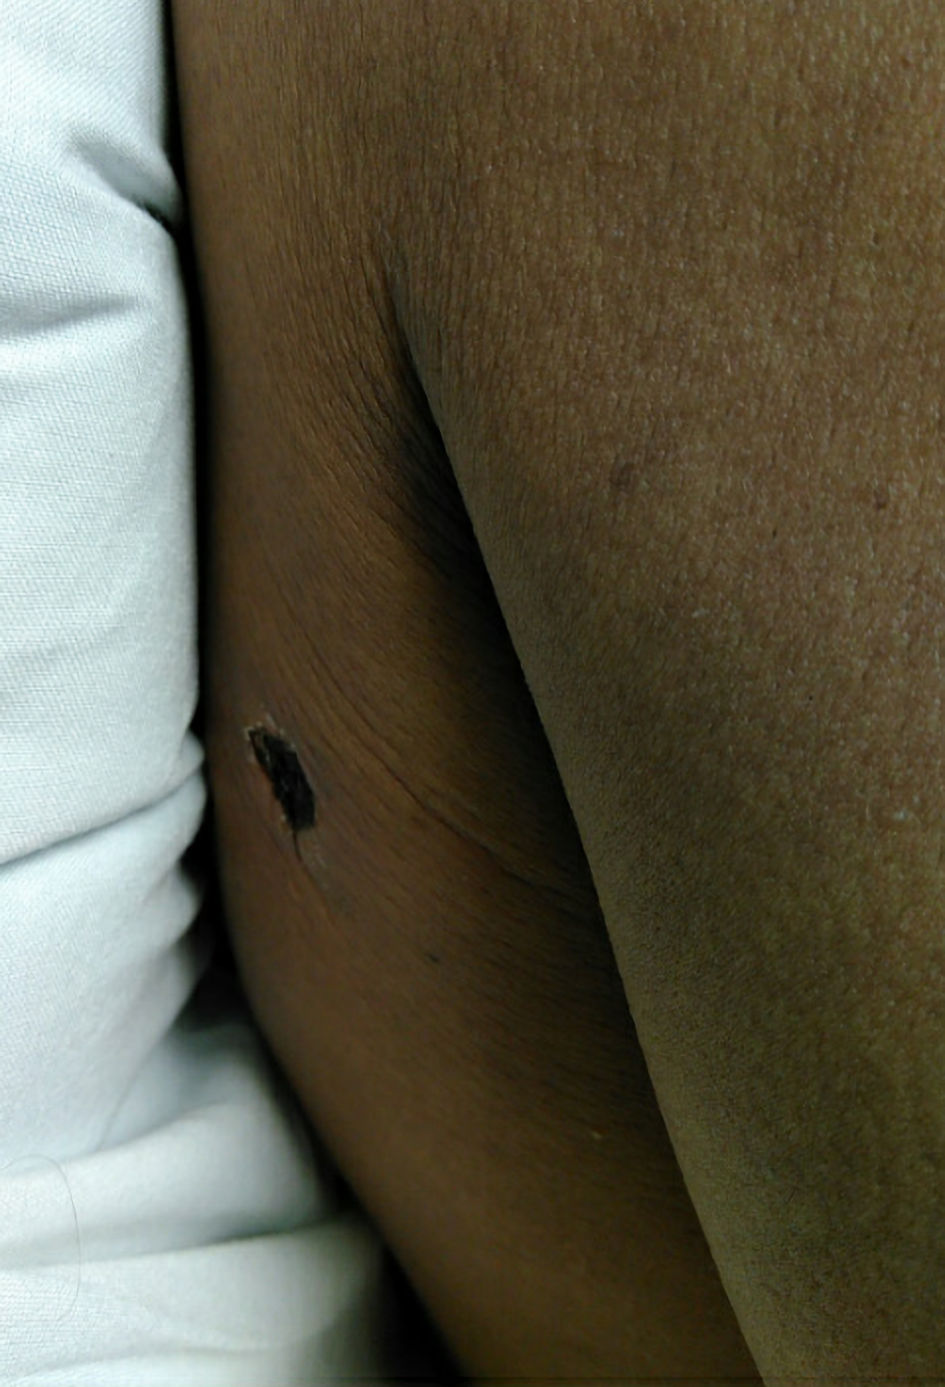 Cureus, Brown Recluse Spider Bite Resulting in Coombs Negative Hemolytic  Anemia in a Young Male Requiring Blood Transfusion